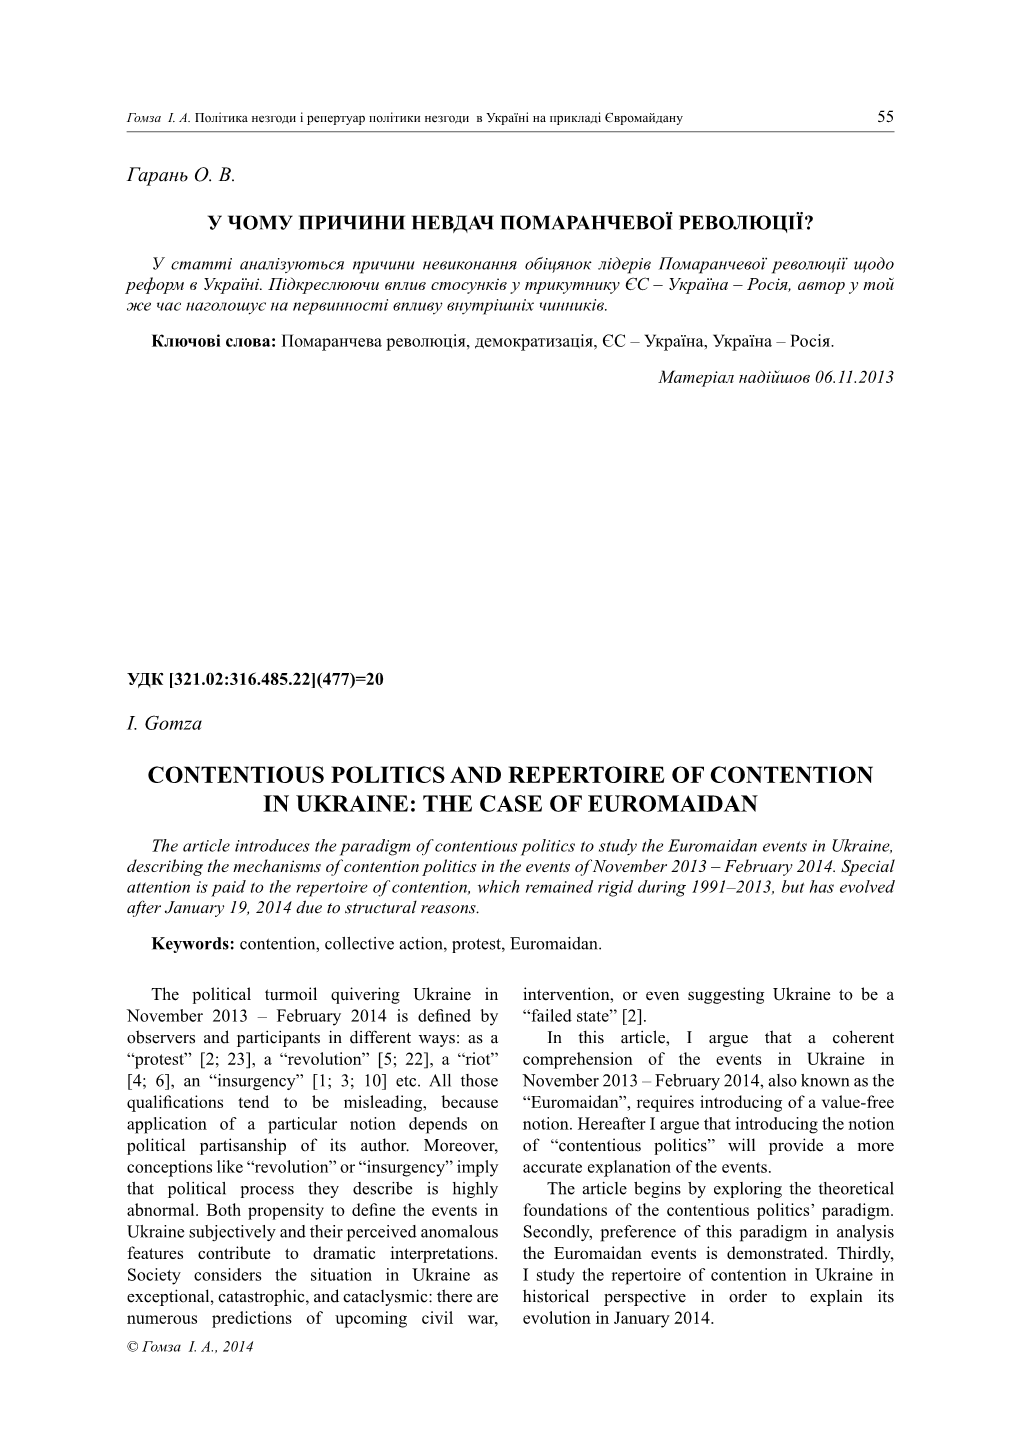 Contentious Politics and Repertoire of Contention in Ukraine: the Case of Euromaidan